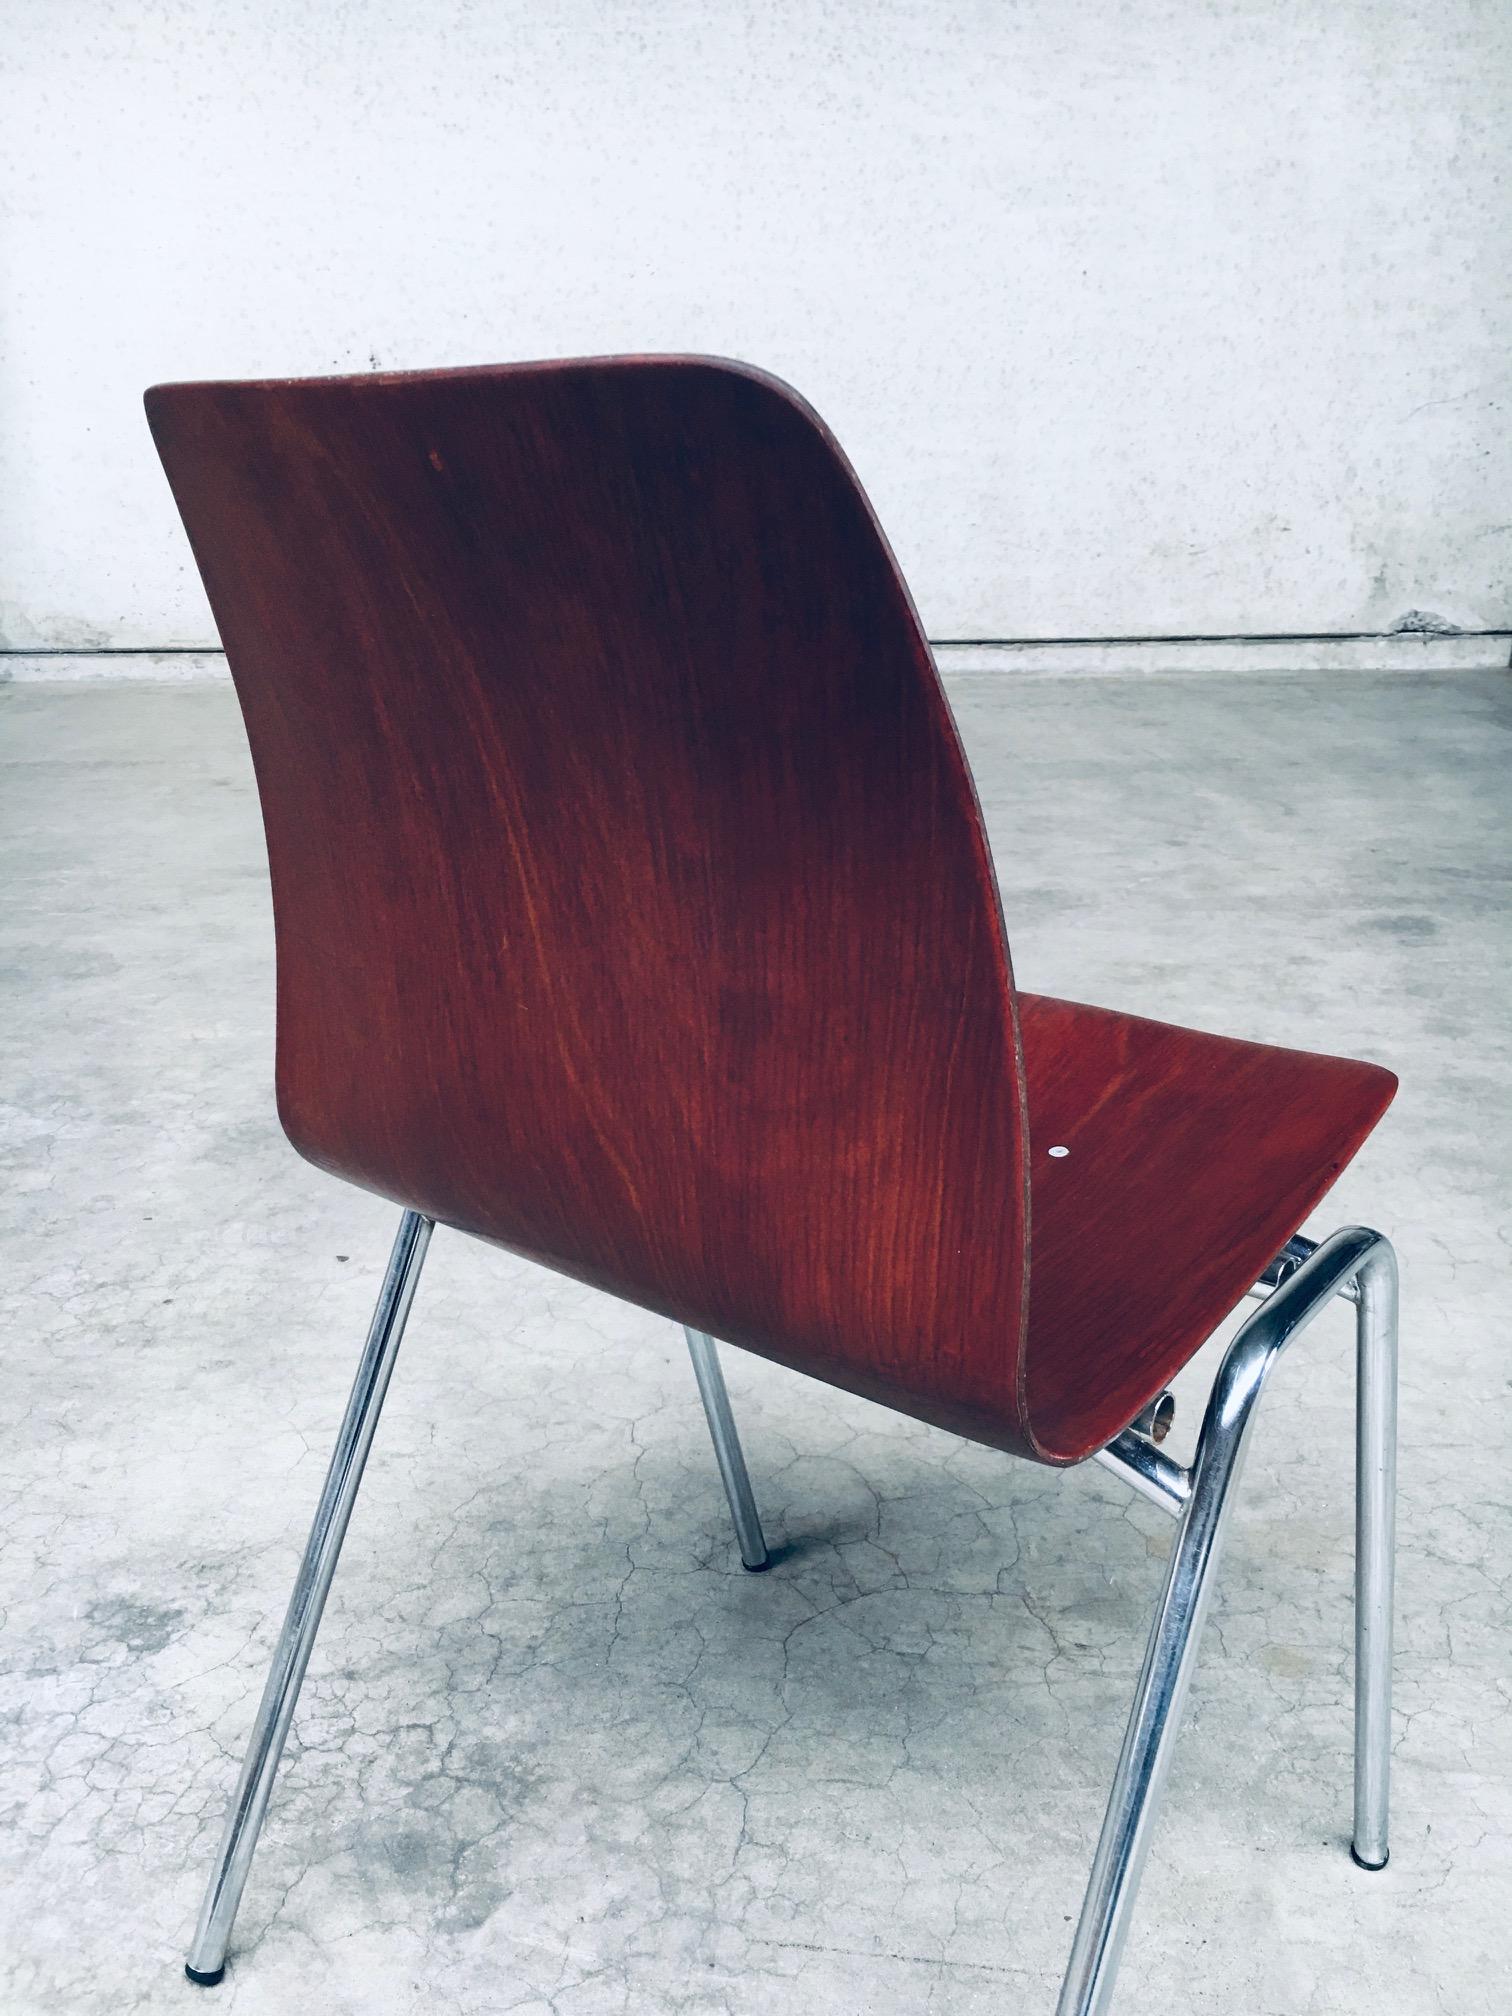 Midcentury Design Stacking Chairs by Elmar Flötotto for Pagholz, 1960's Germany For Sale 9